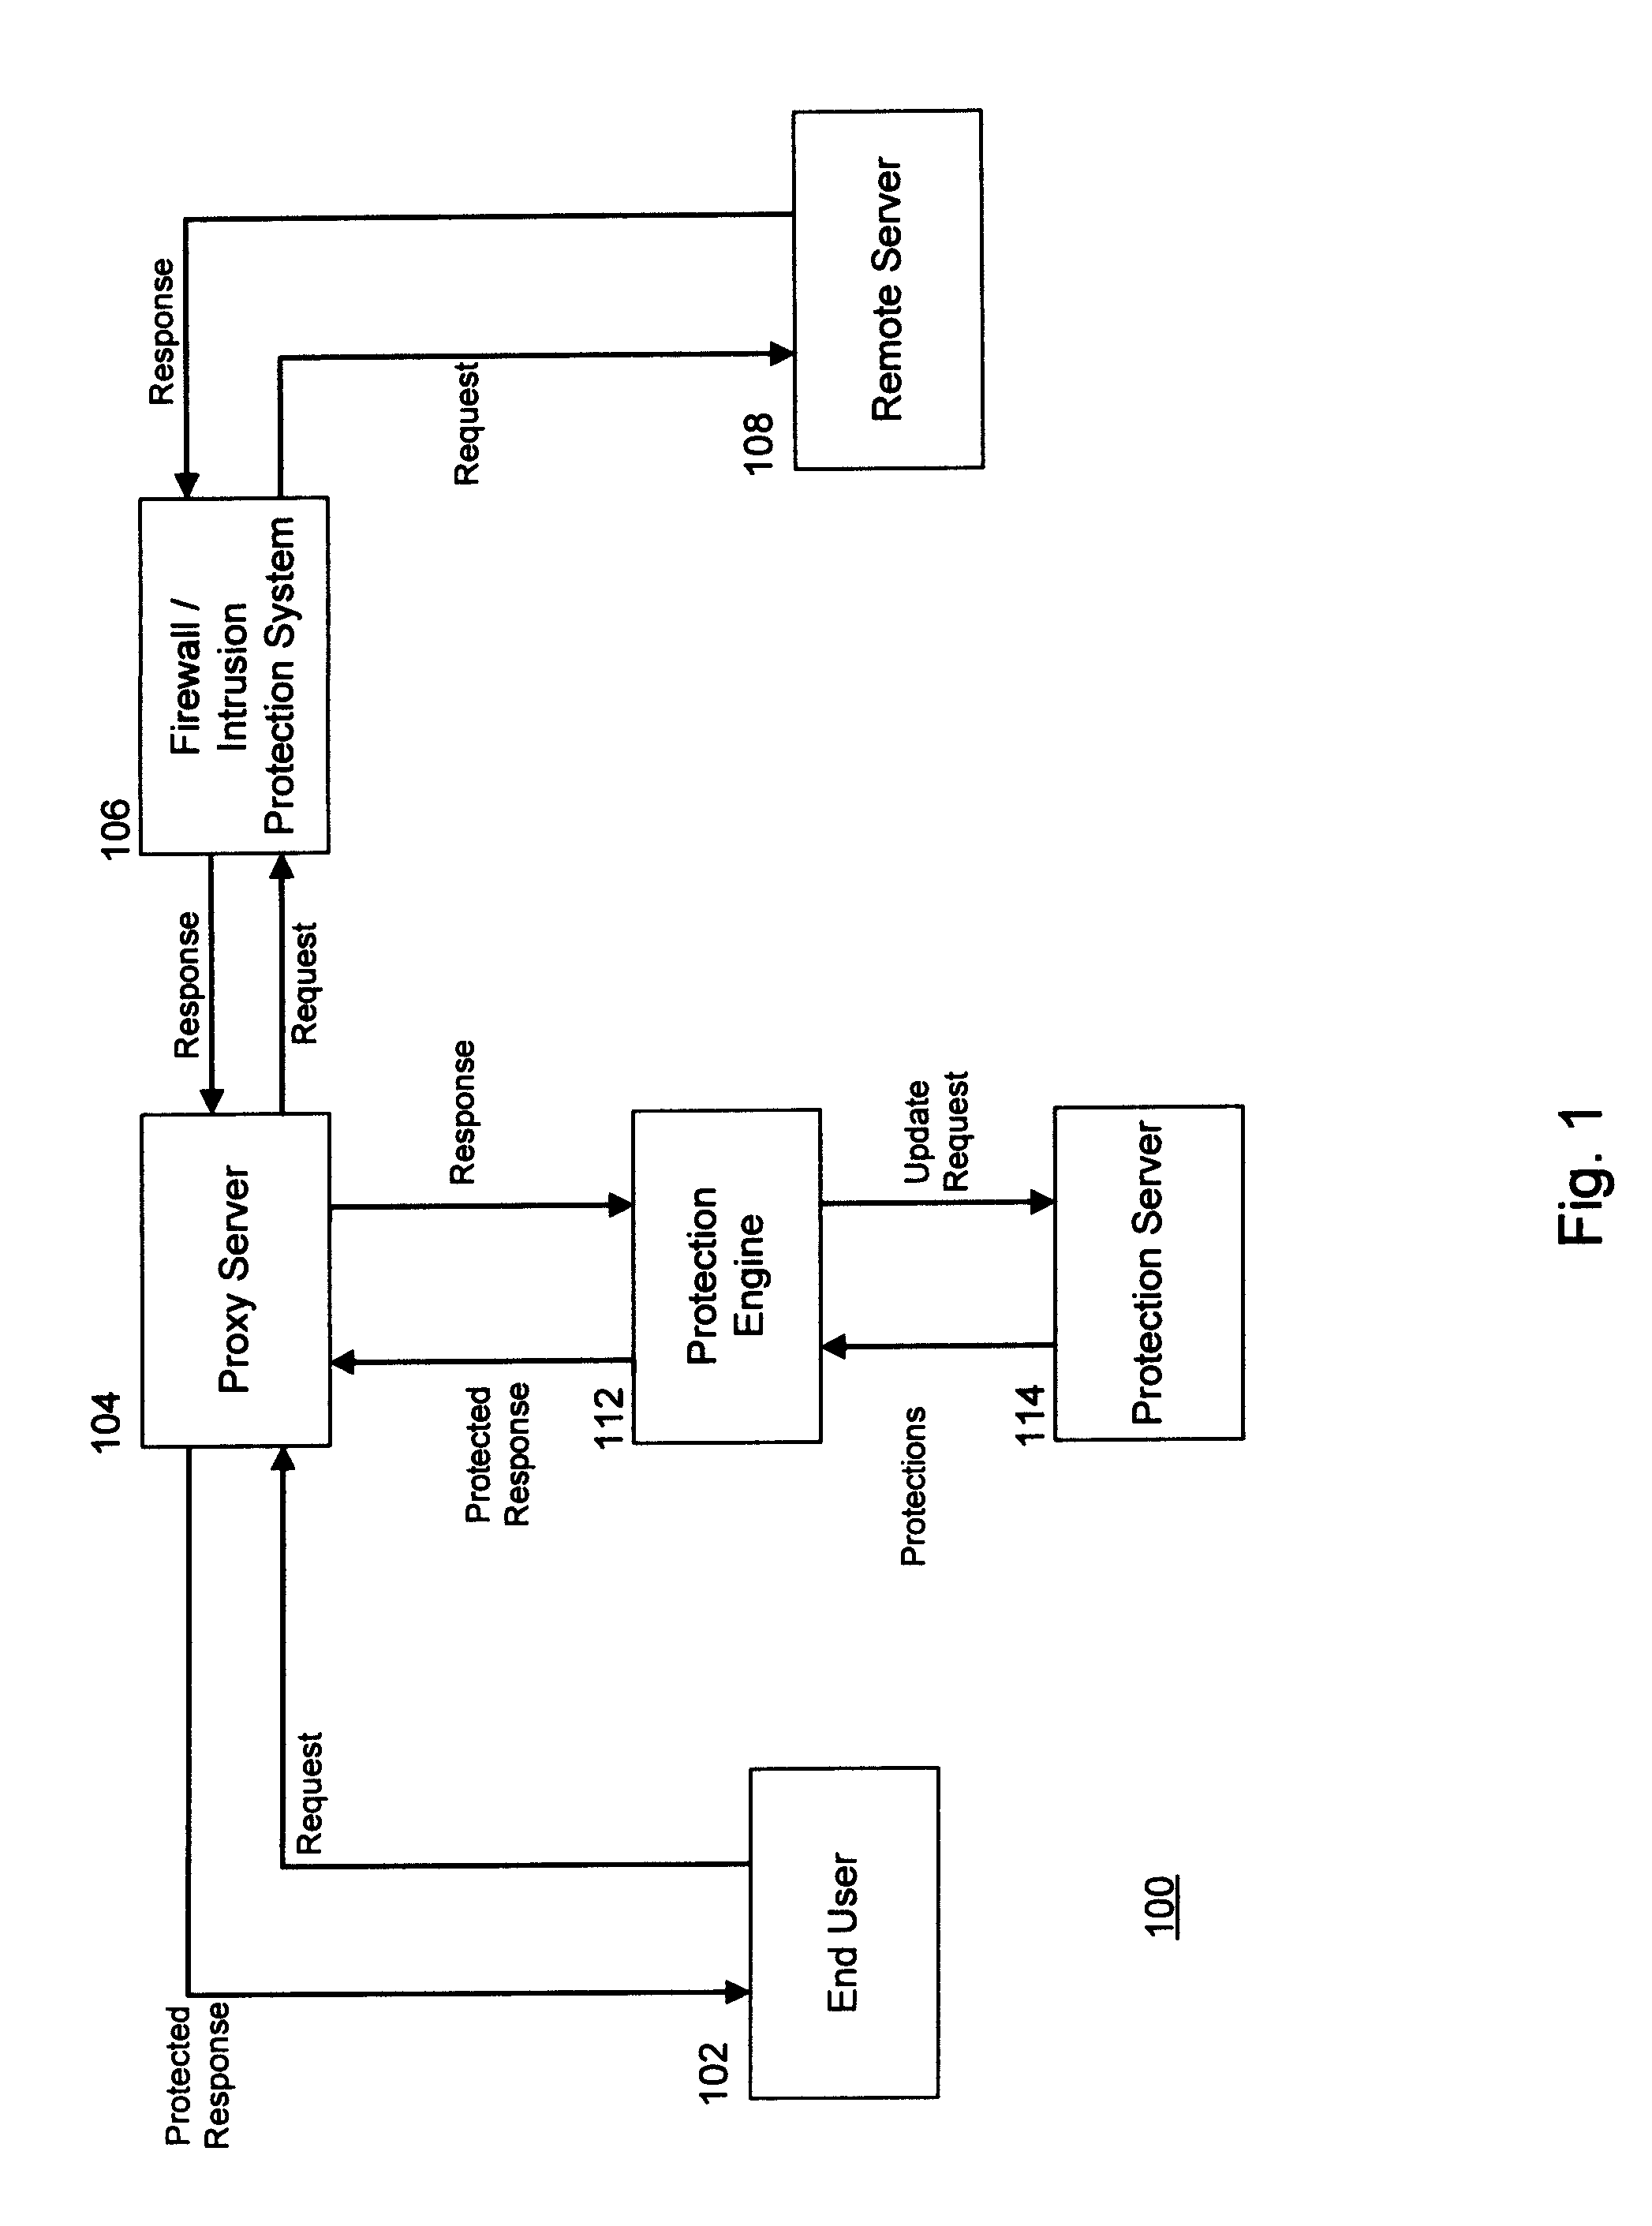 System and Method for Run-Time Attack Prevention